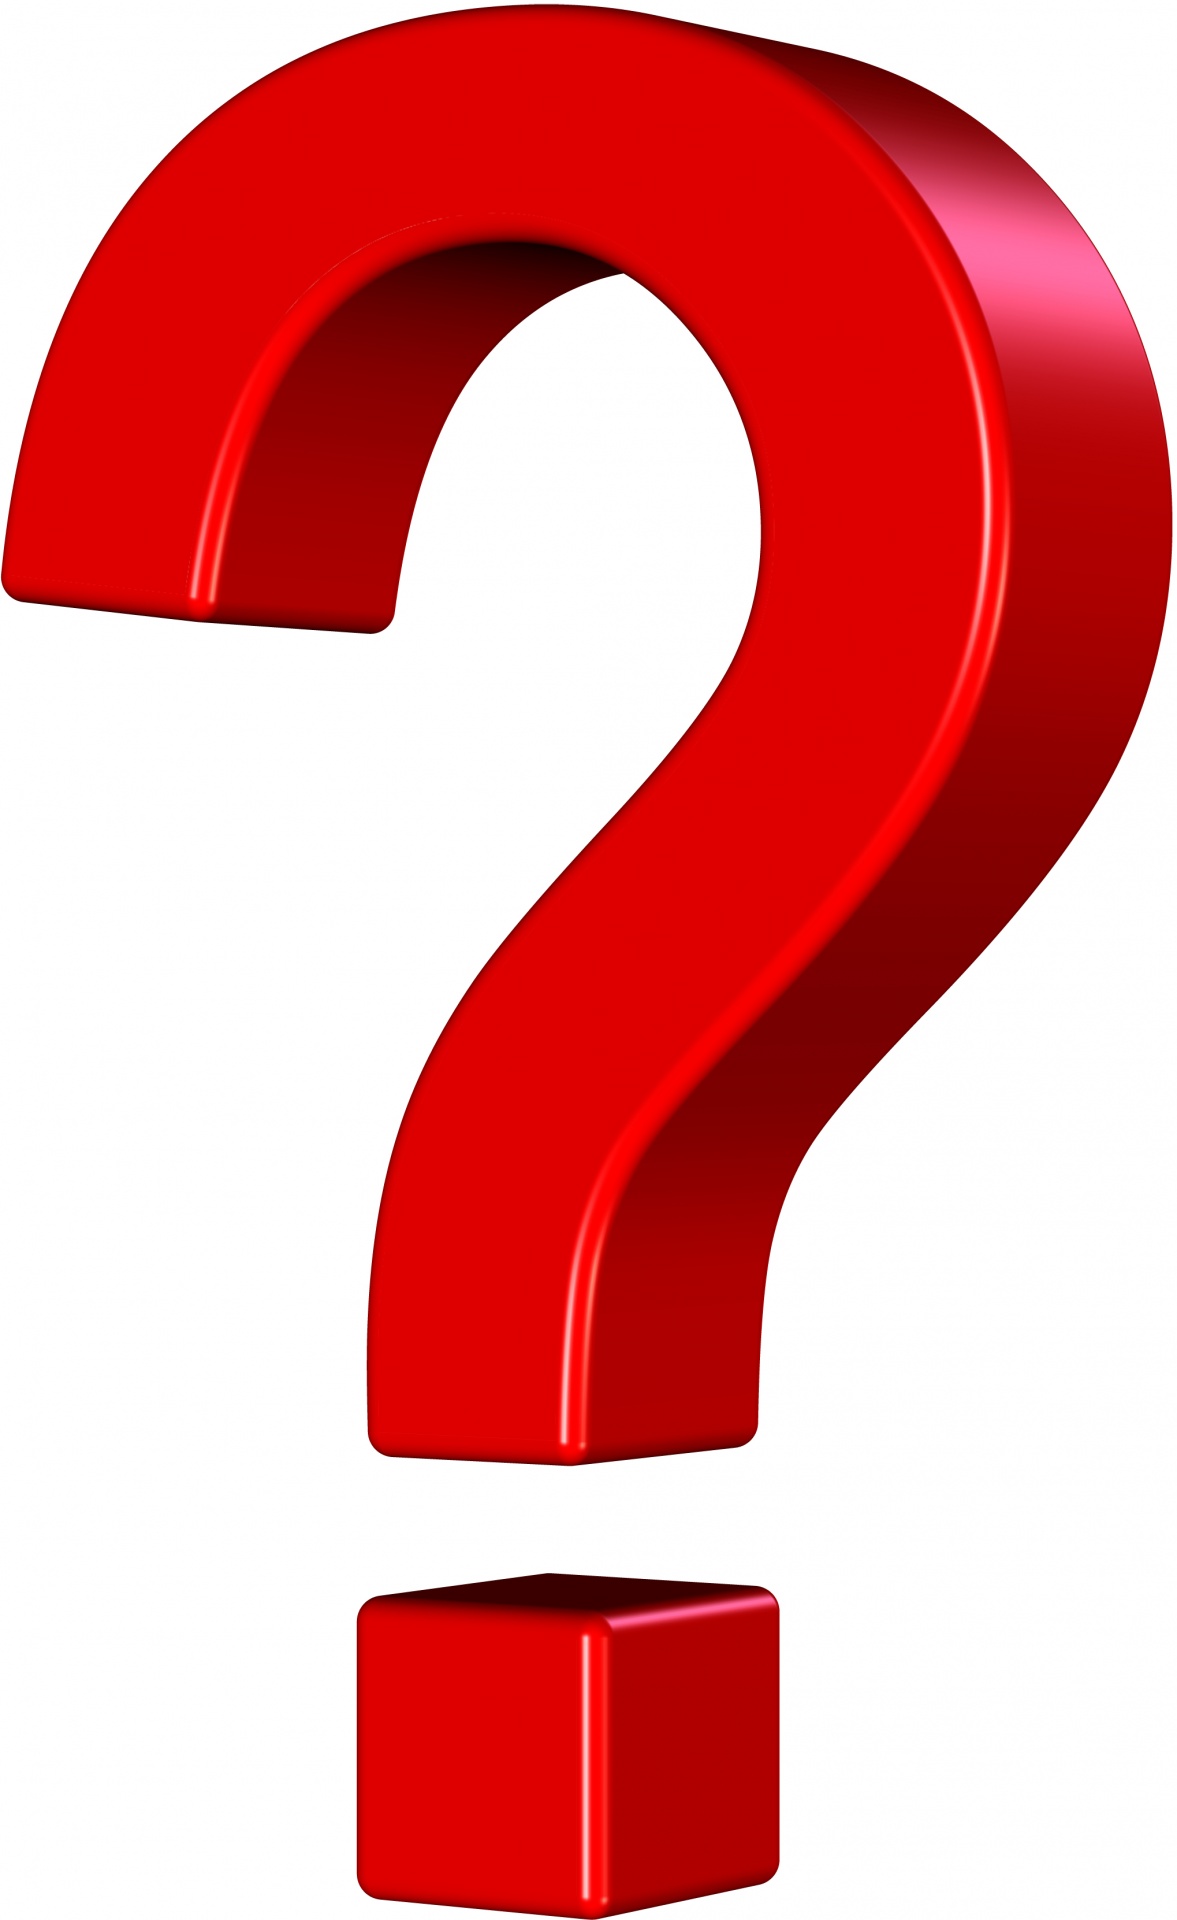 A red question mark symbol.